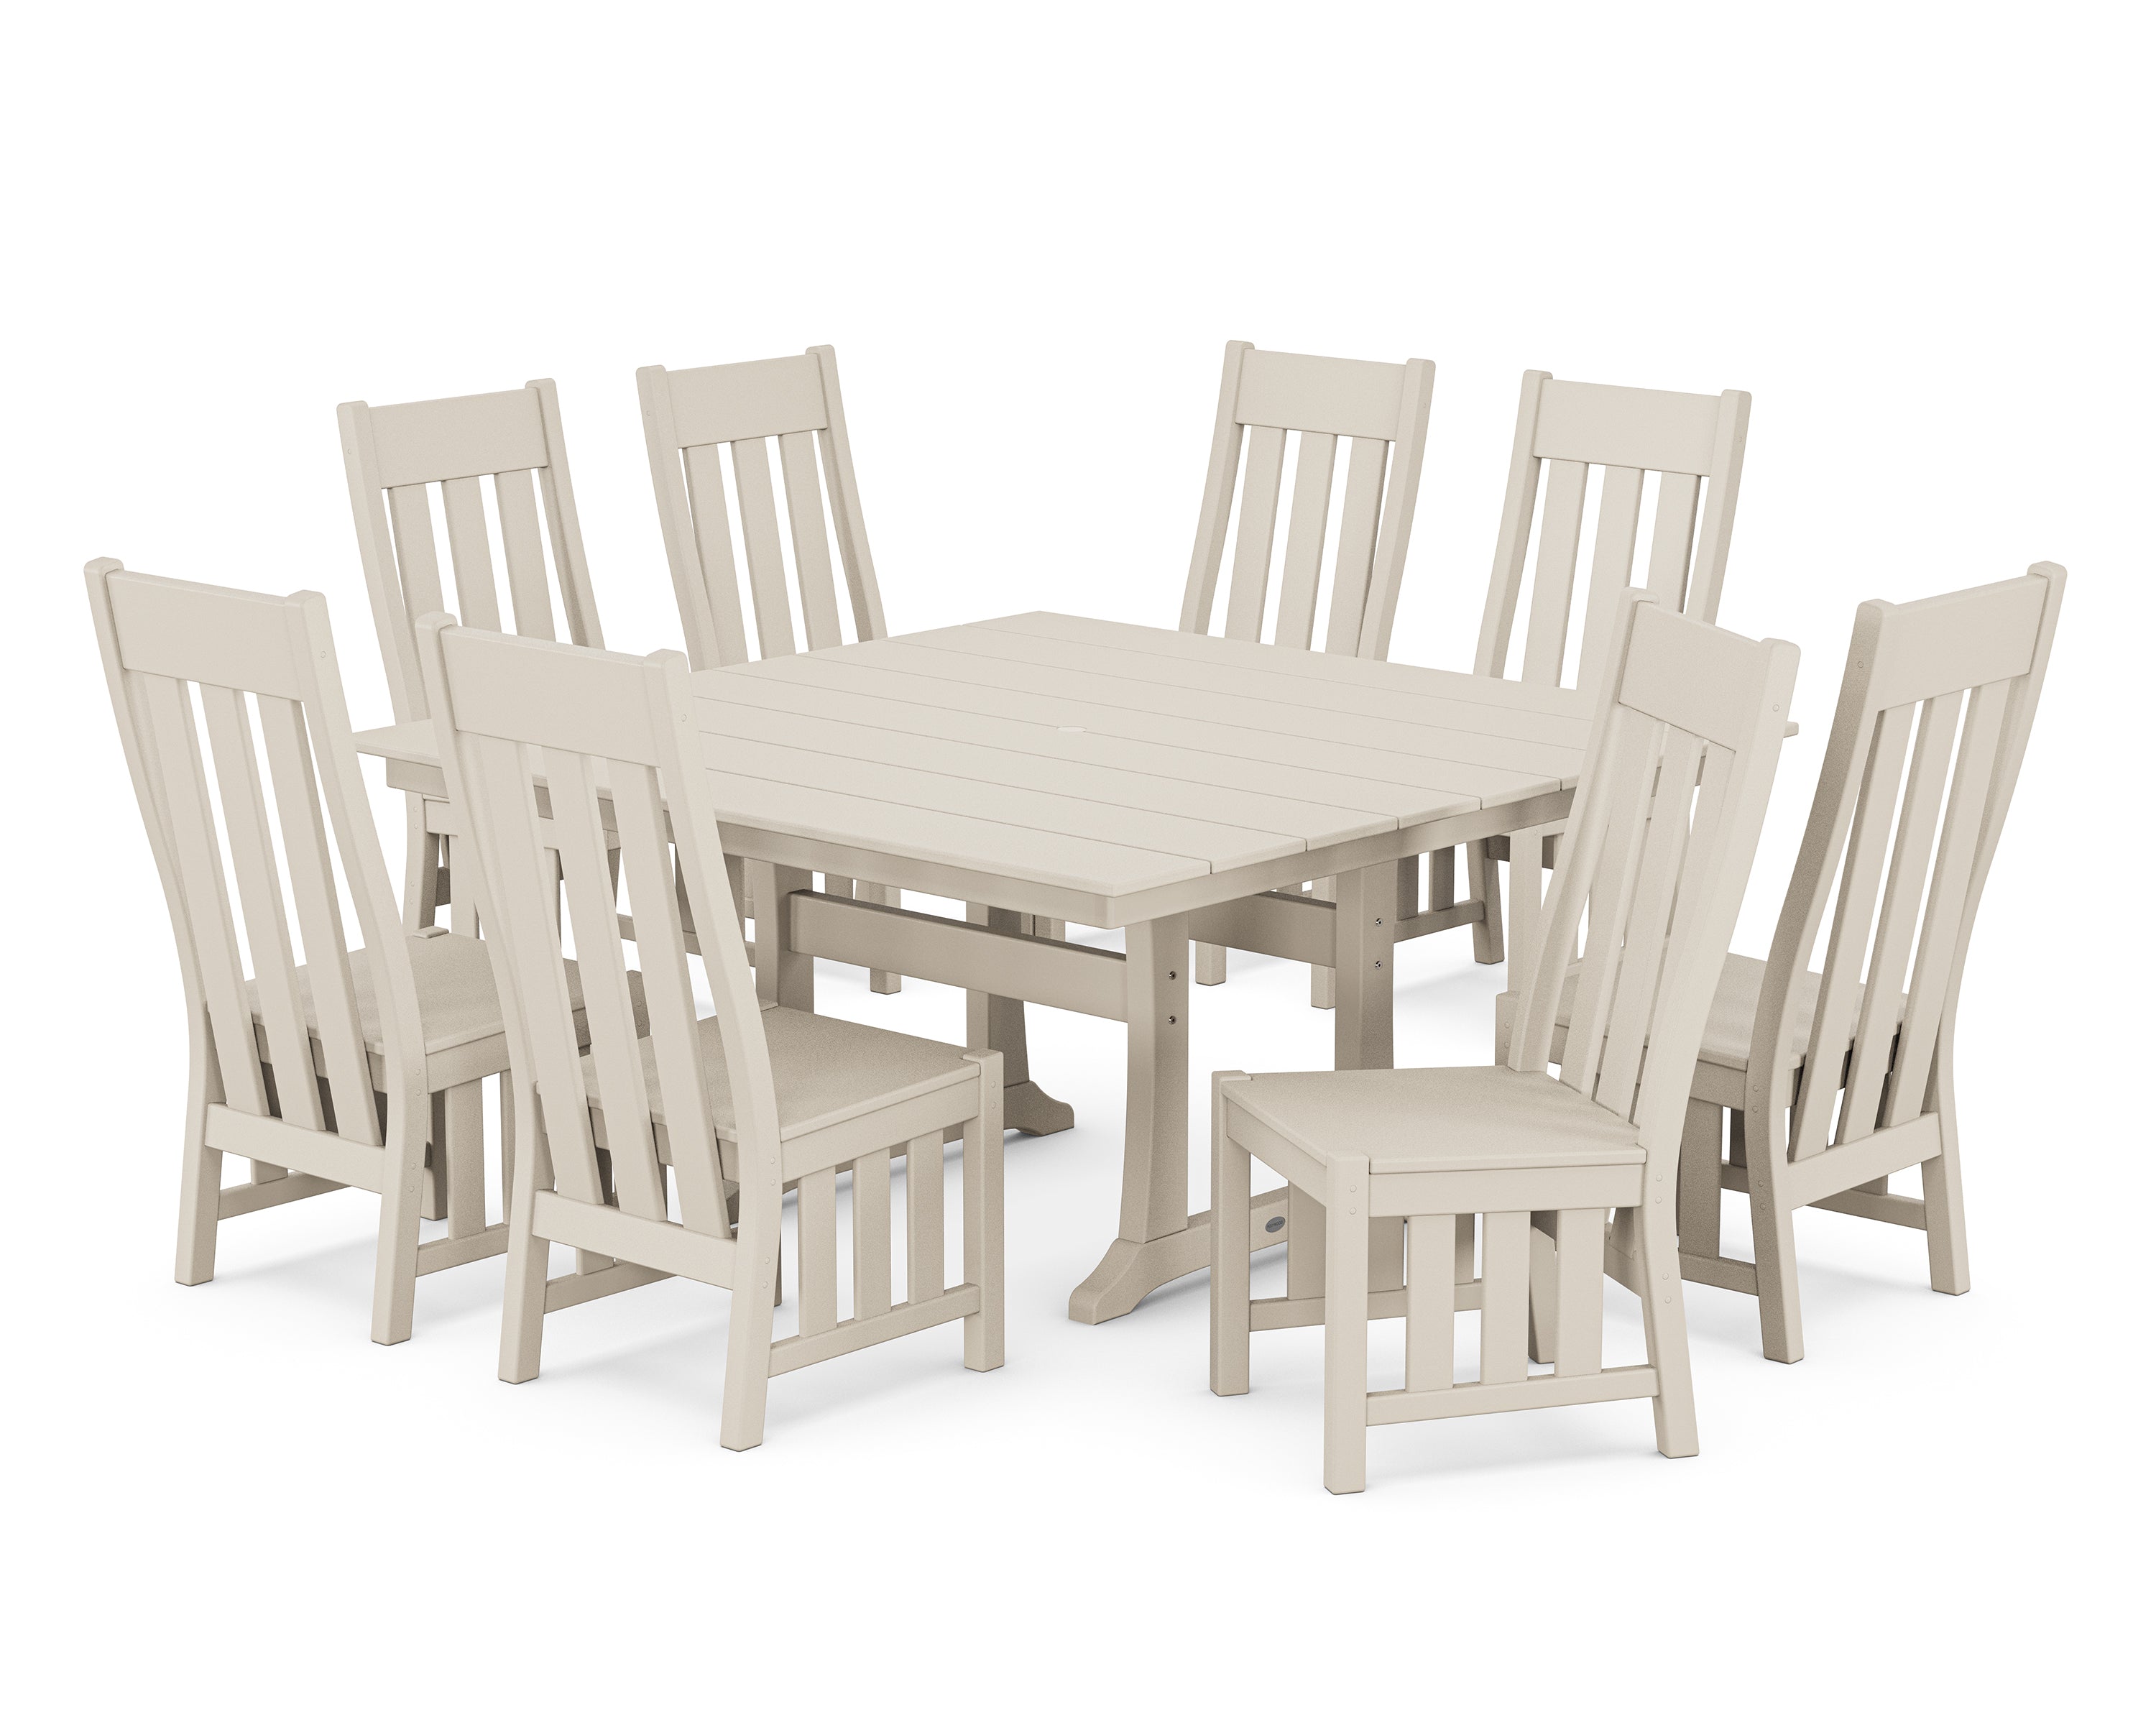 Martha Stewart by POLYWOOD® Acadia Side Chair 9-Piece Square Farmhouse Dining Set with Trestle Legs in Sand